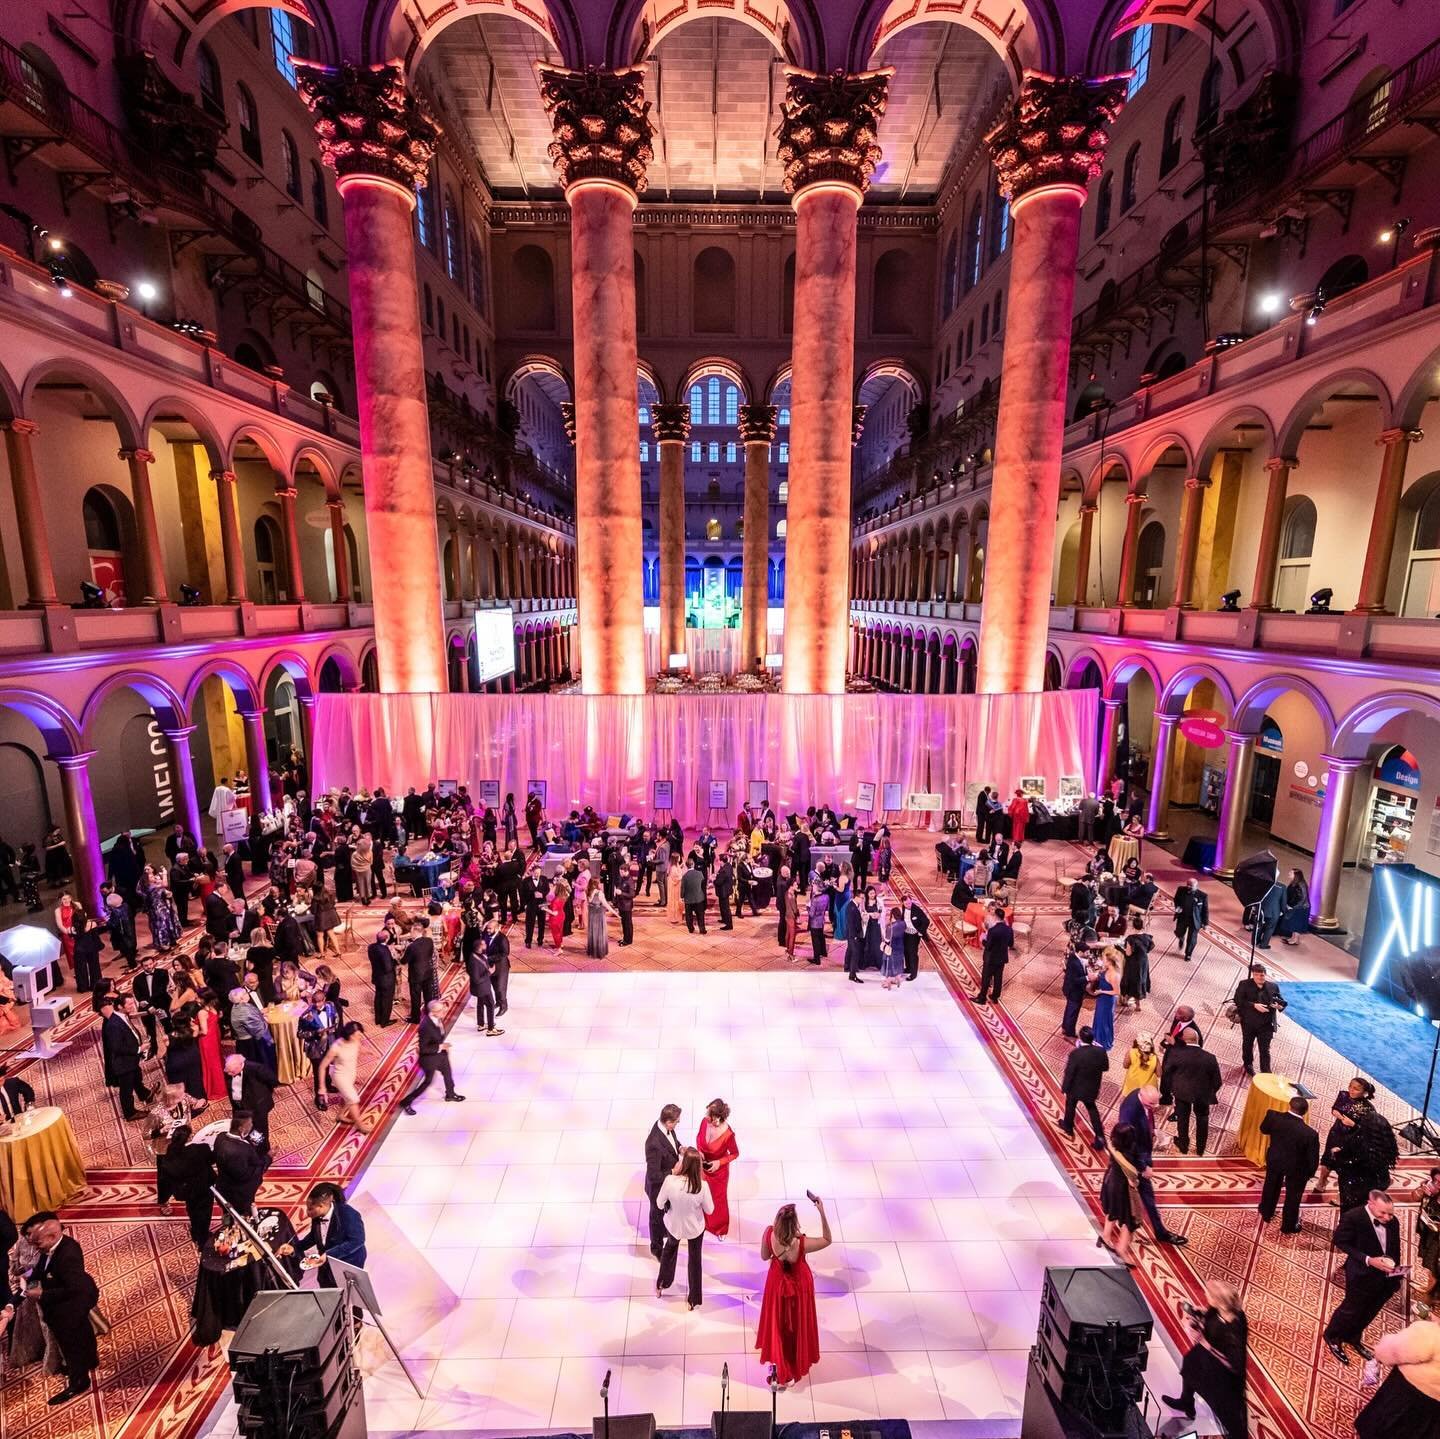 Counting down the days till we're back at the stunning National Building Museum for the @dcbia 38th Annual Achievement Awards ⭐️ Our team is so excited to be back planning the best night in DC real estate development! 👏🏼